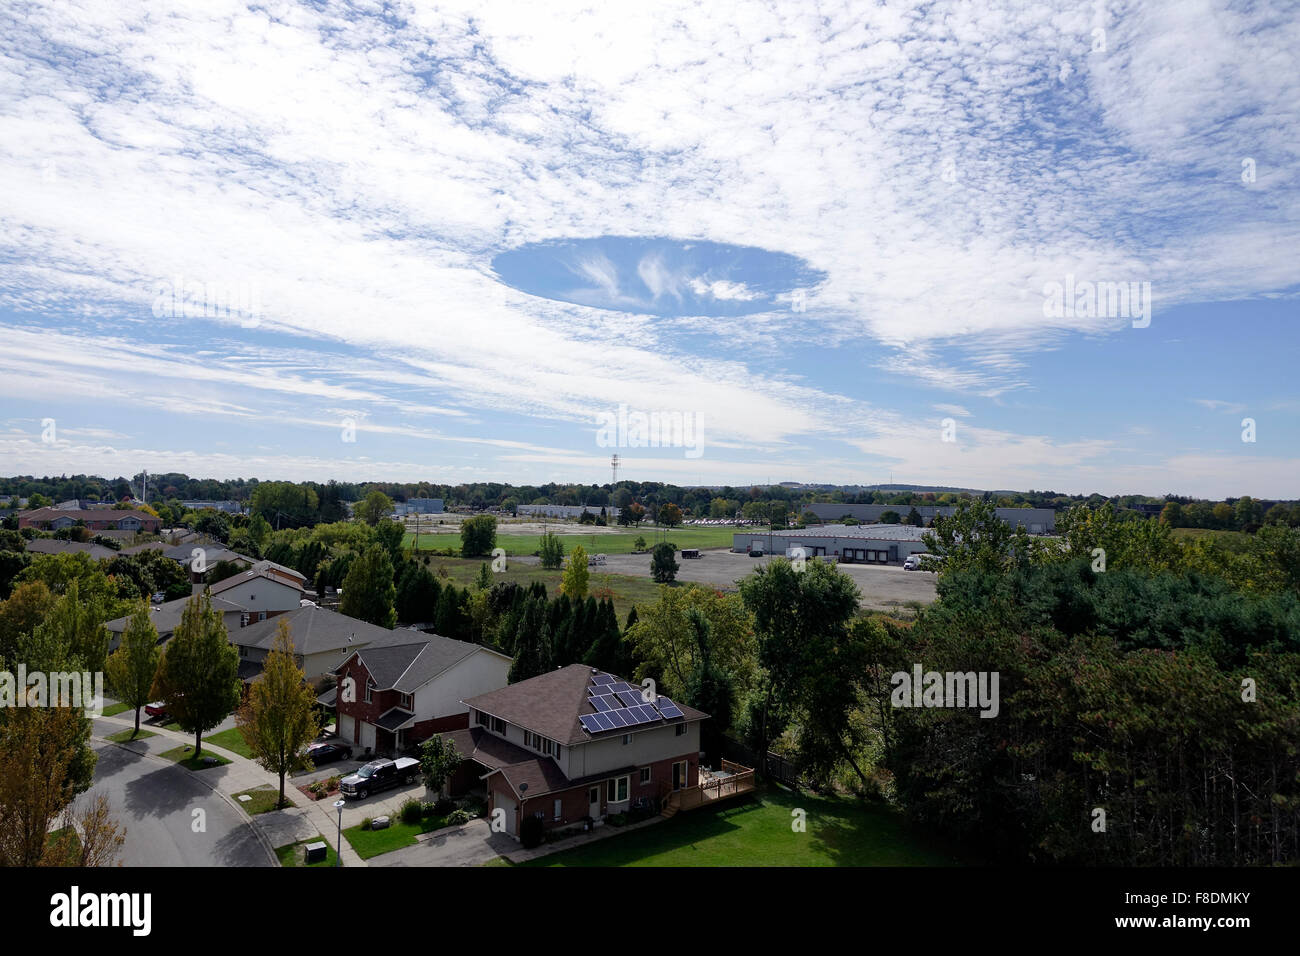 A Fallstreak Cloud Formation Over Woodstock Ontario Canada On October 1st 2015 Stock Photo